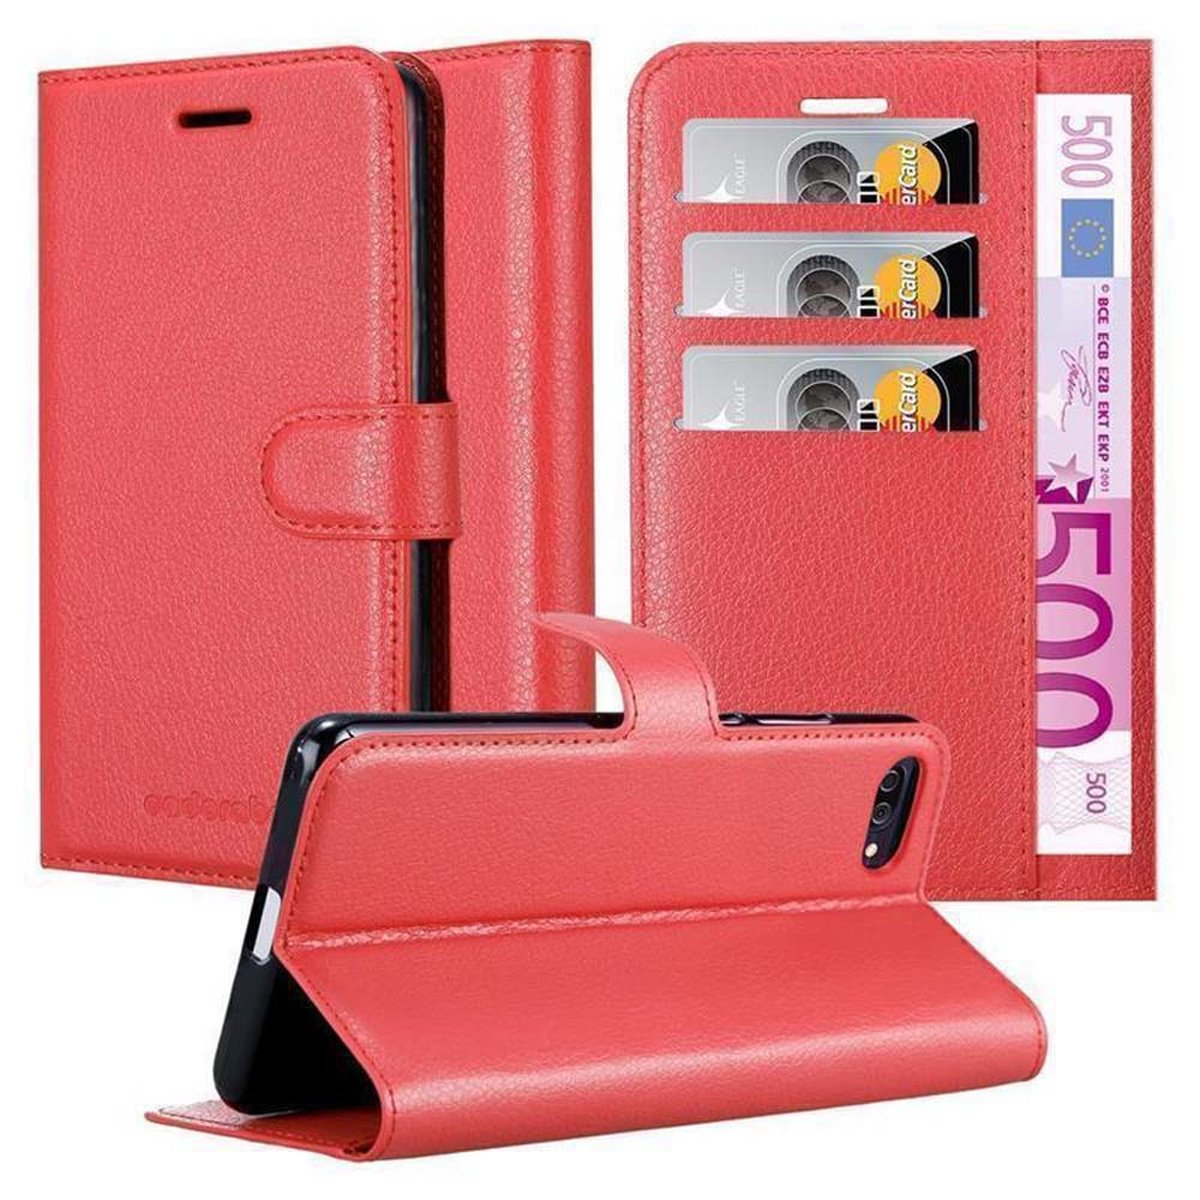 MAX KARMIN Bookcover, Standfunktion, 4 ZenFone Hülle ROT Book (5.5 CADORABO Asus, Zoll),